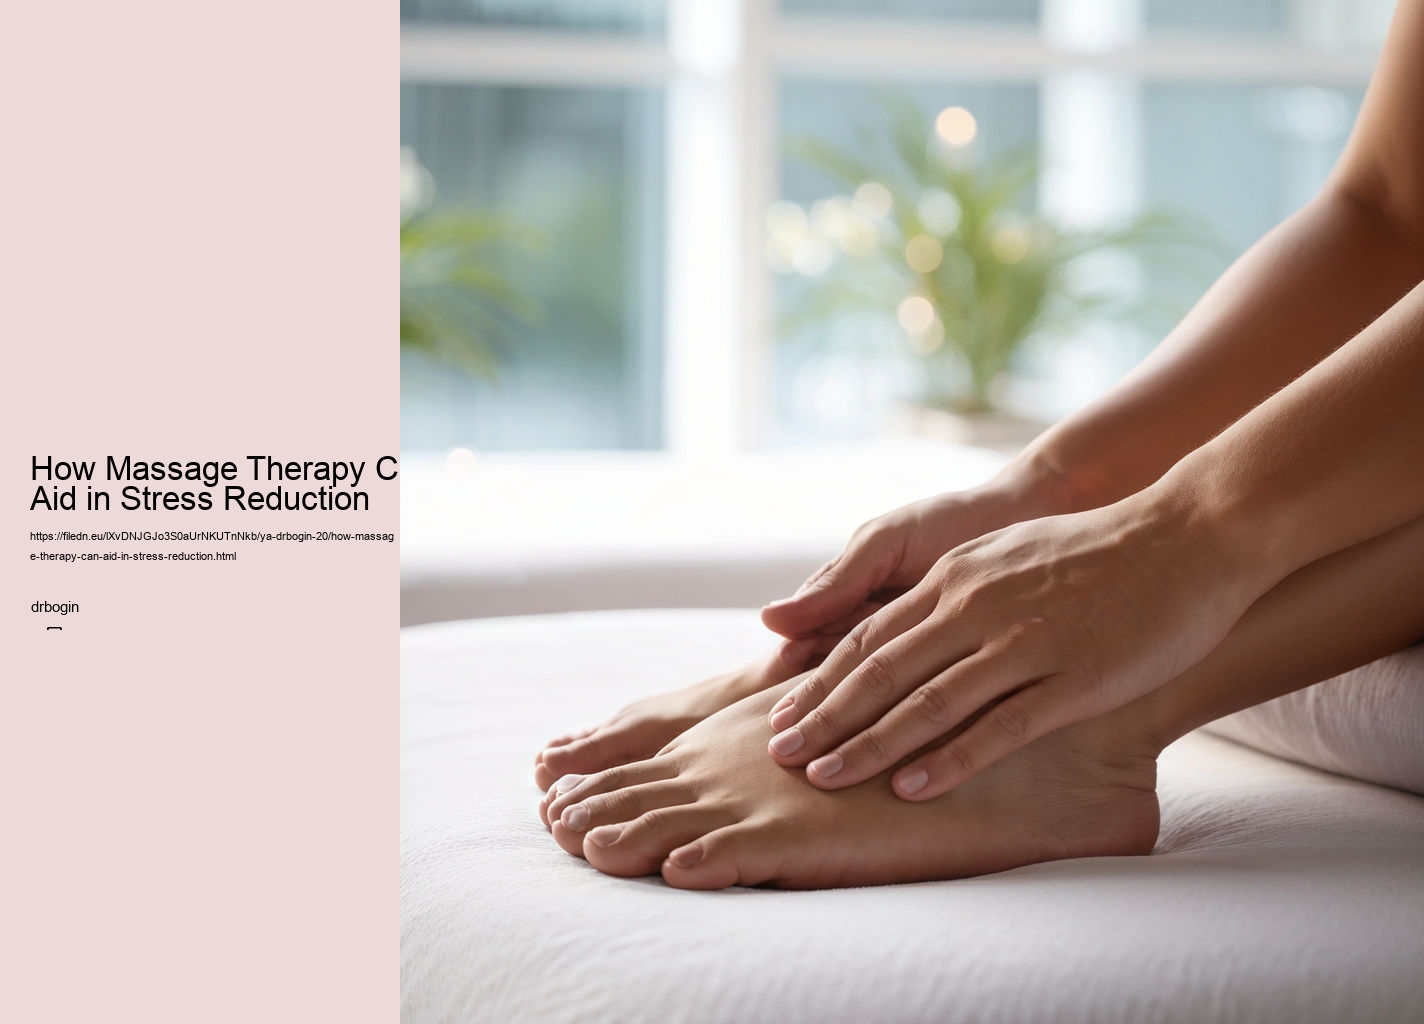 How Massage Therapy Can Aid in Stress Reduction